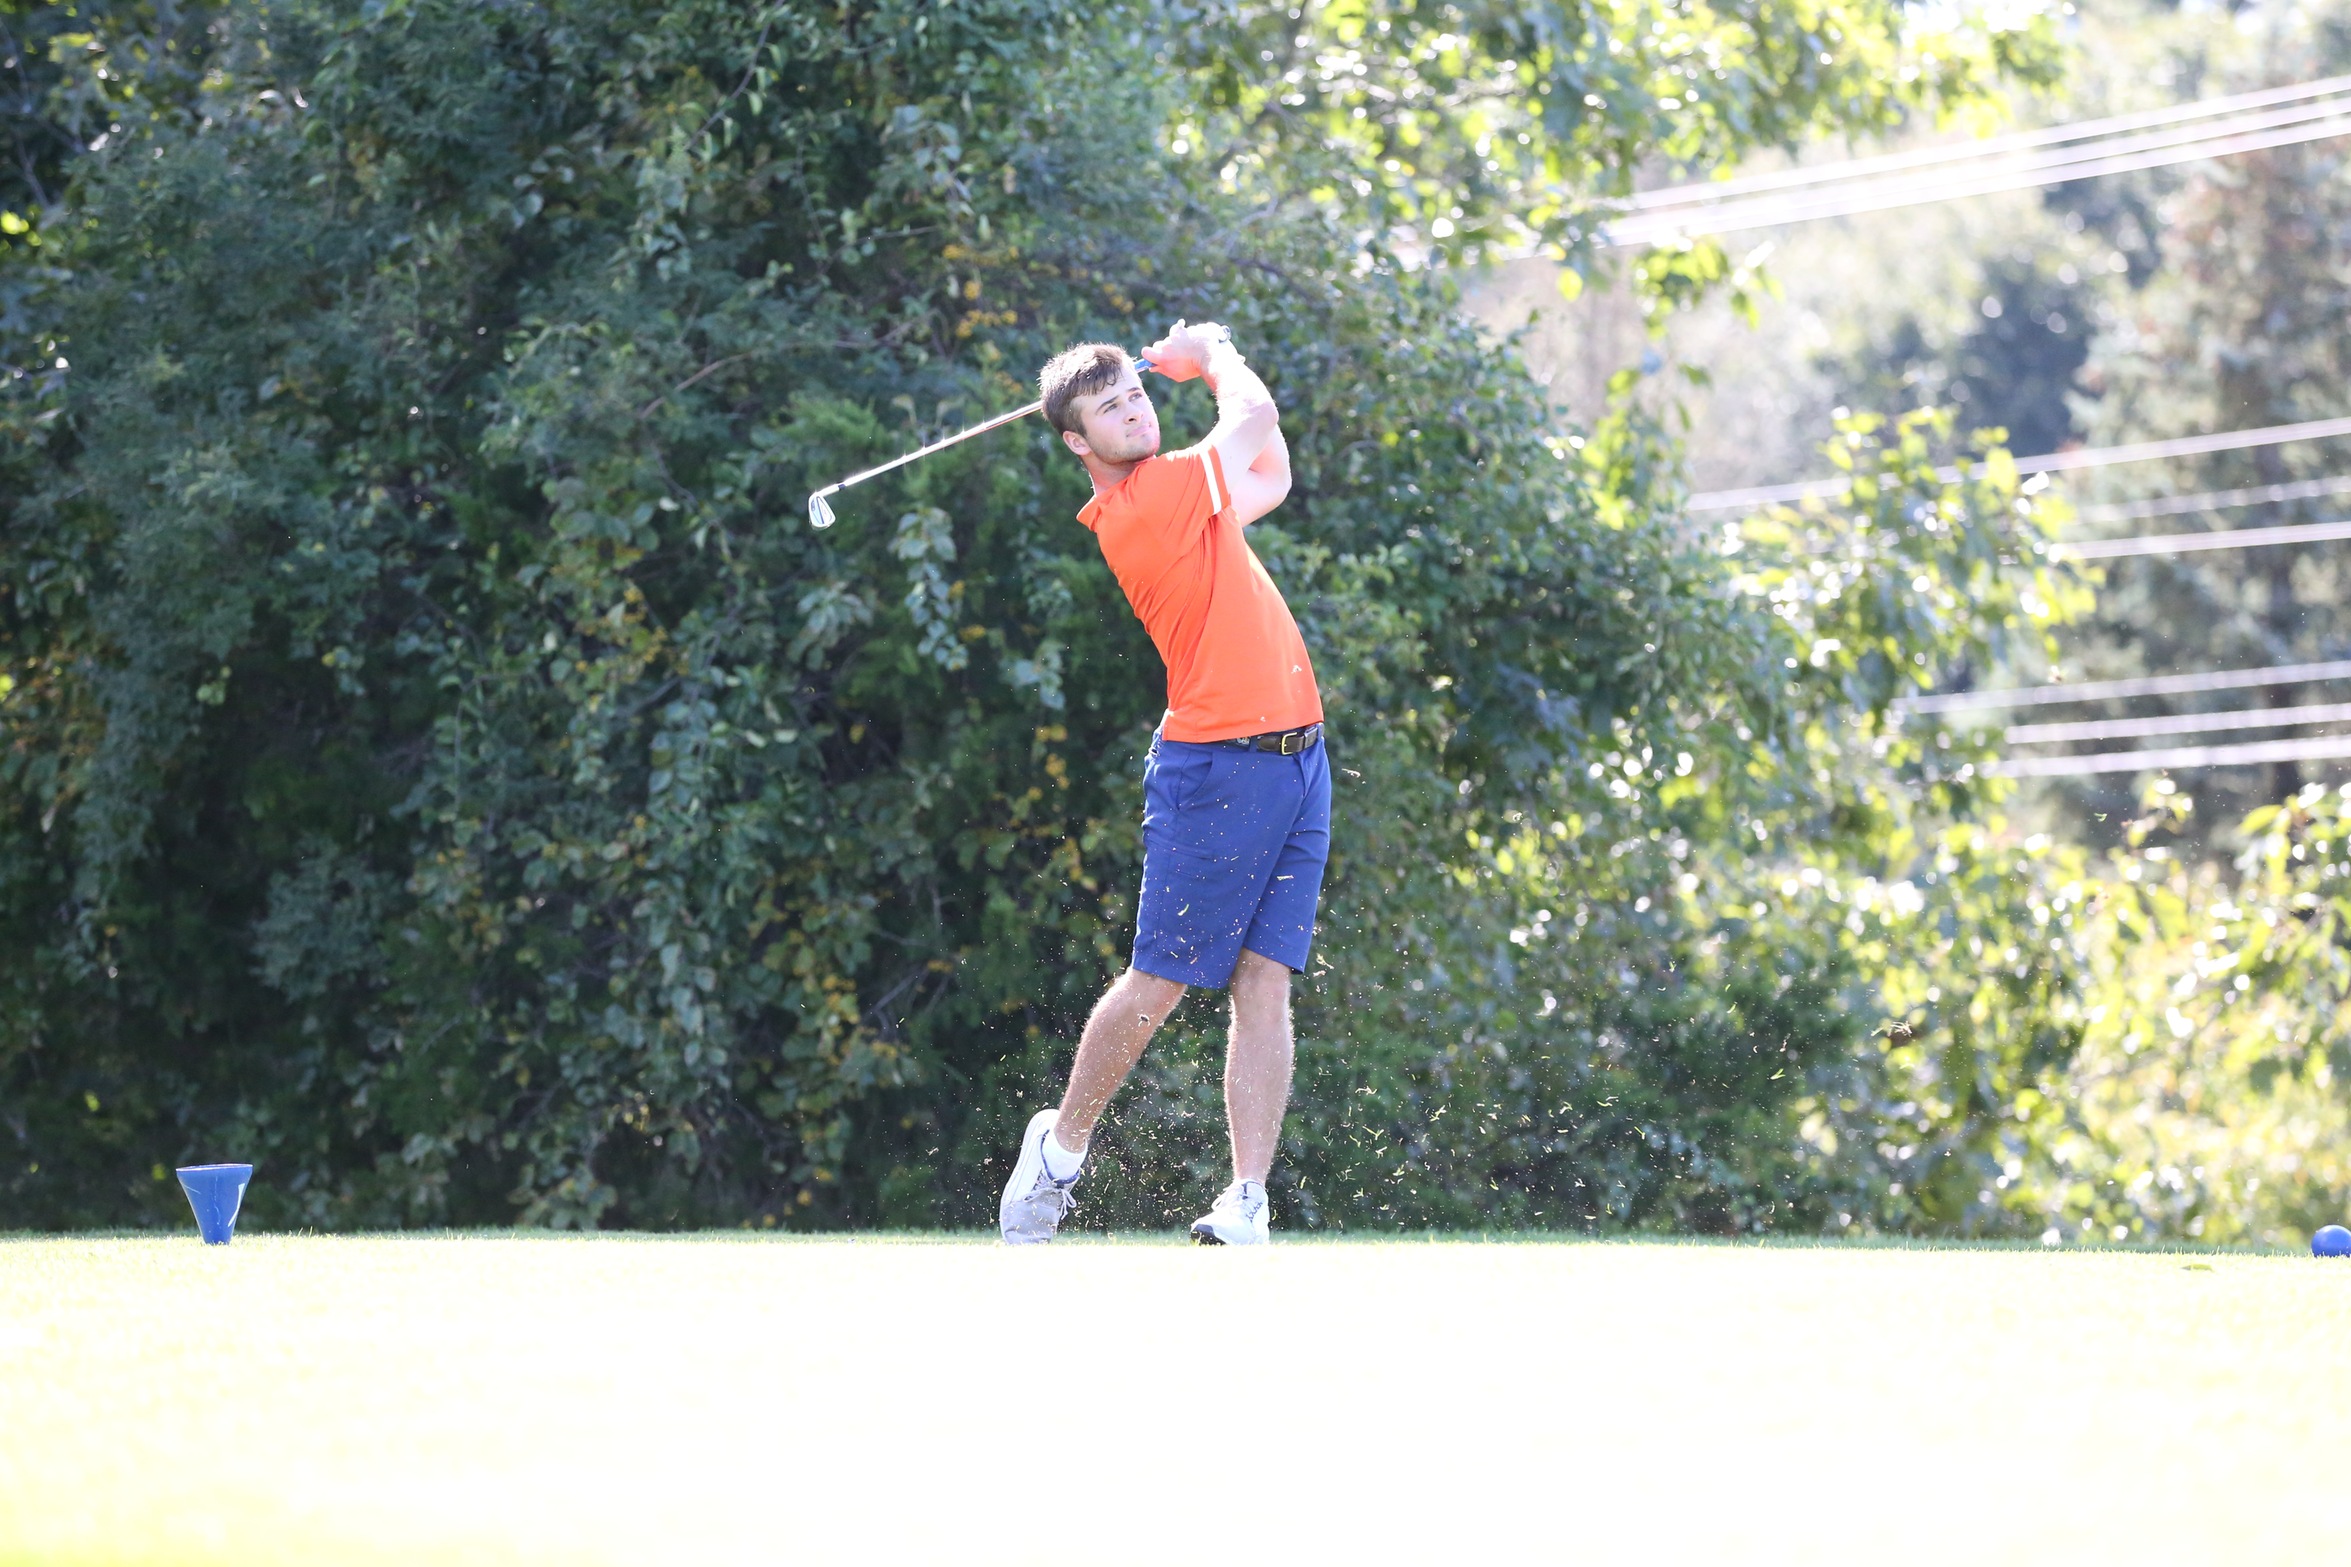 Salem State Finishes Tied for 11th at NEIGA